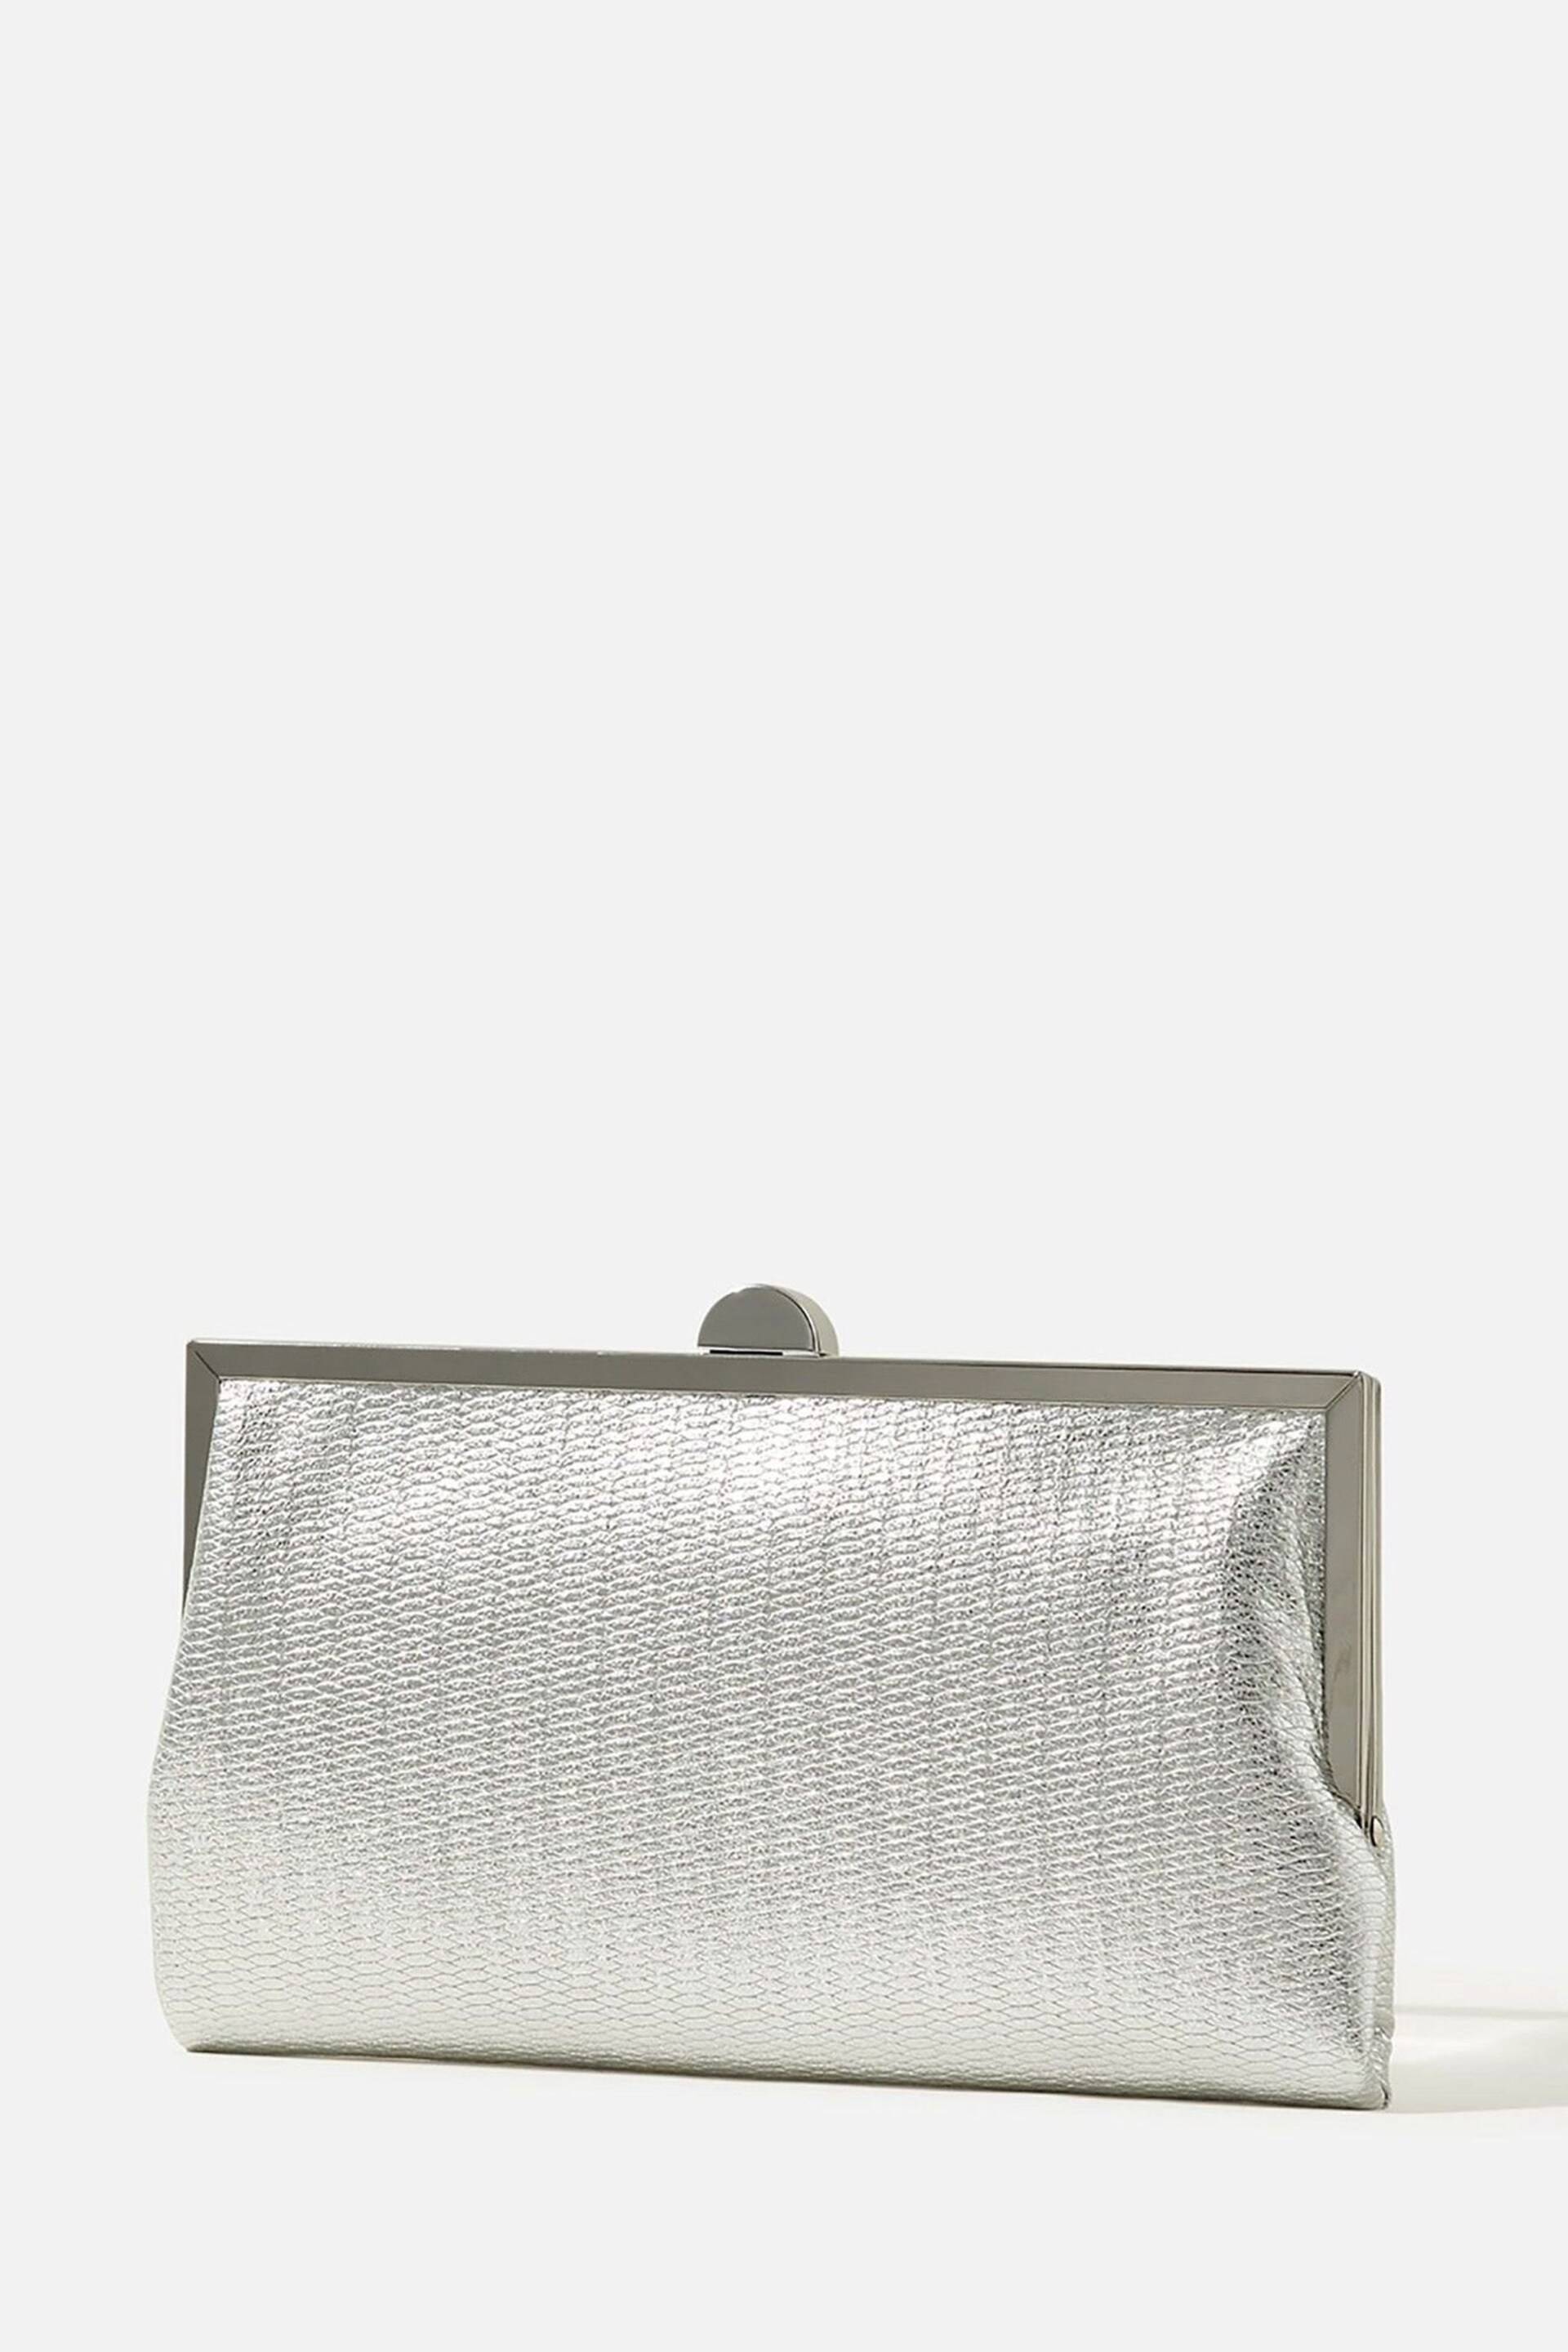 Accessorize Silver Womens Metallic Frame Clutch Bag - Image 3 of 4